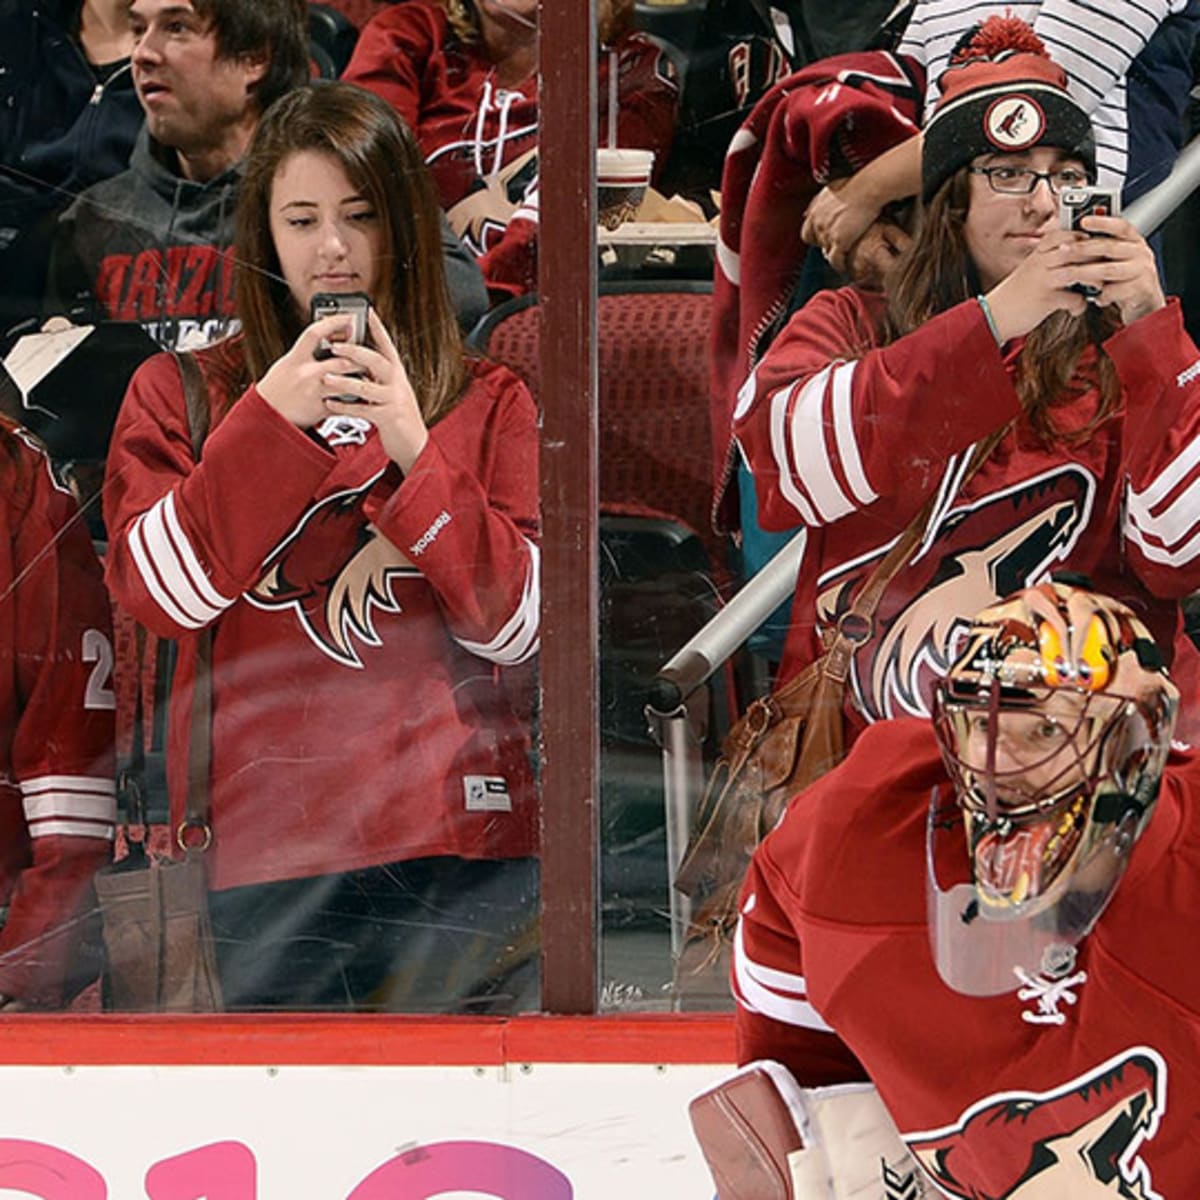 Check out these Social Media Apps reimagined as Cool Hockey